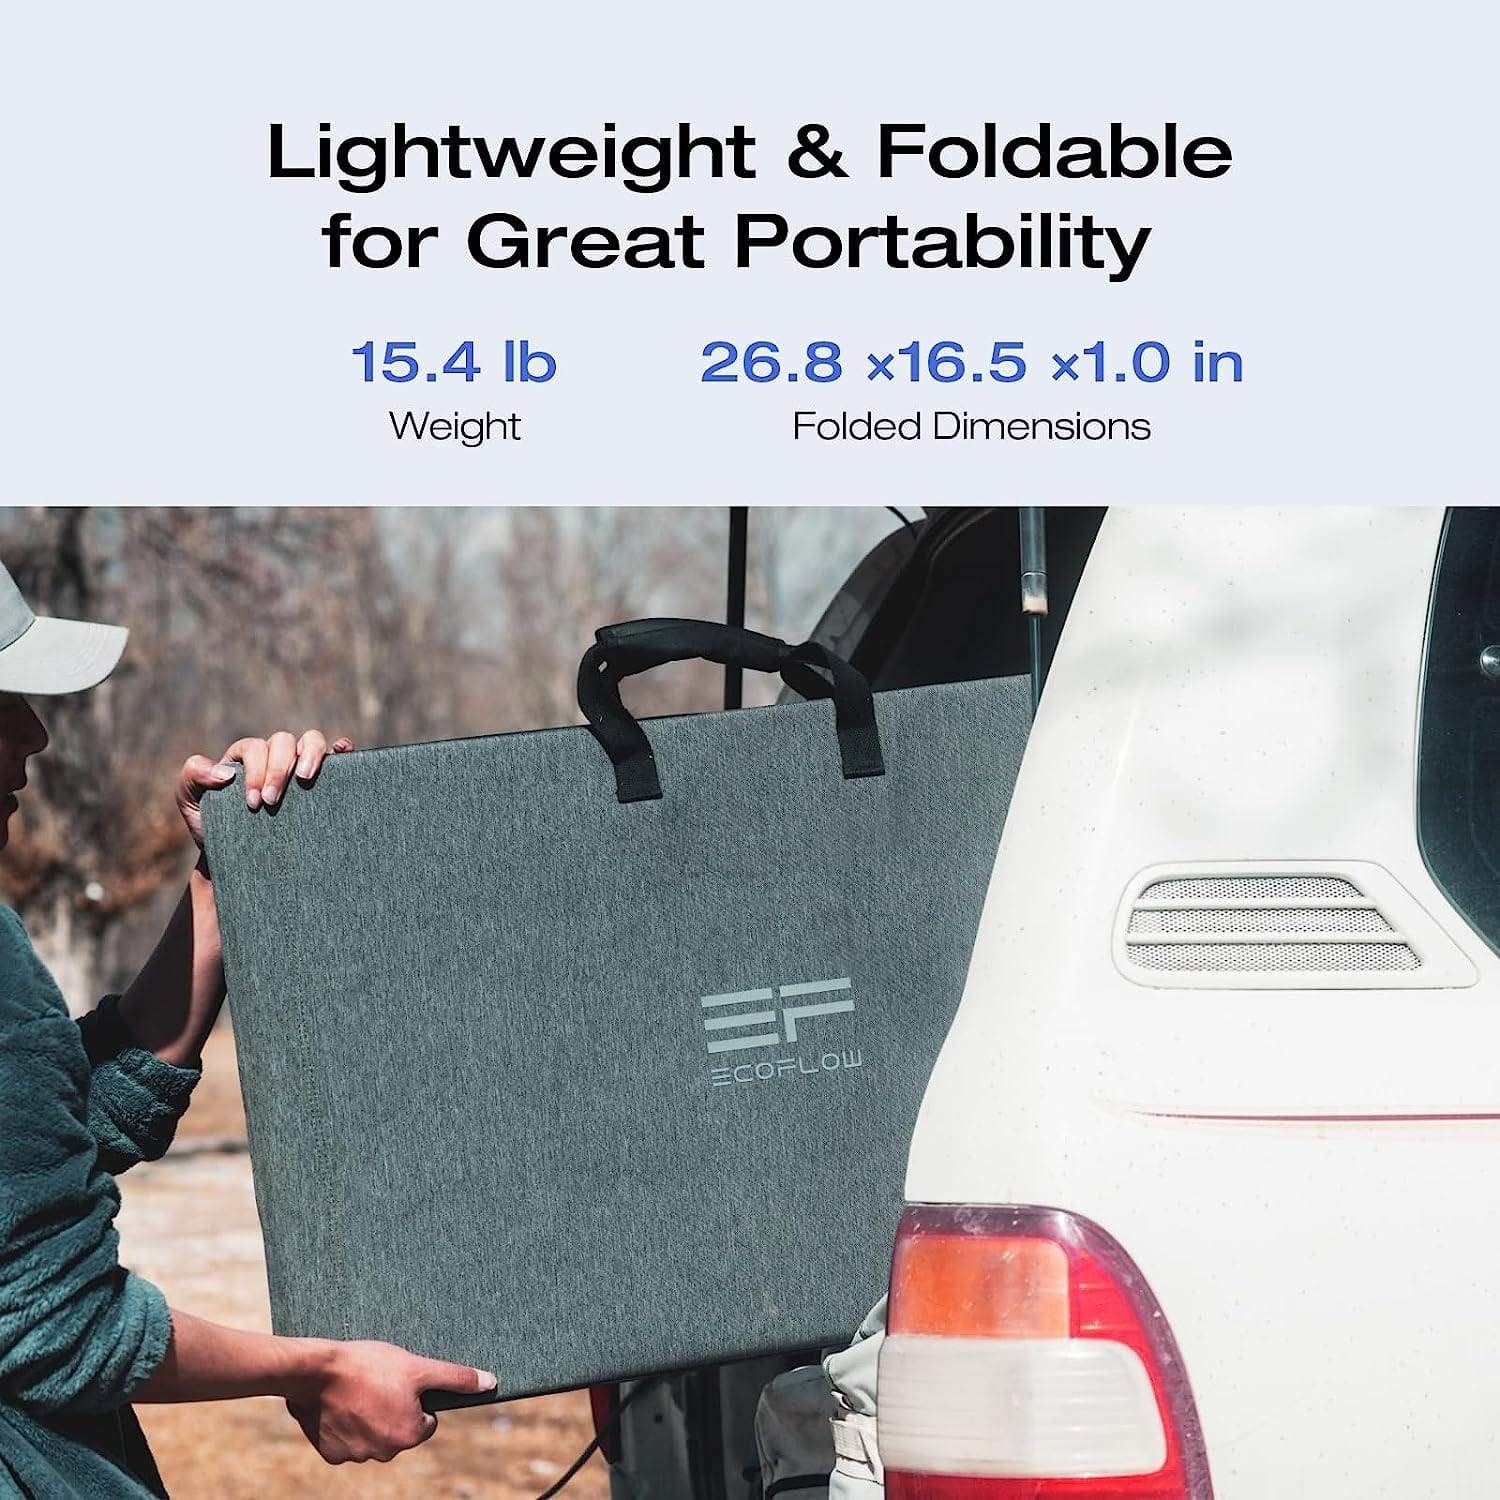 EcoFlow 160W Portable Solar Panel - Chainable, Foldable Solar Charger For Power Station Generators